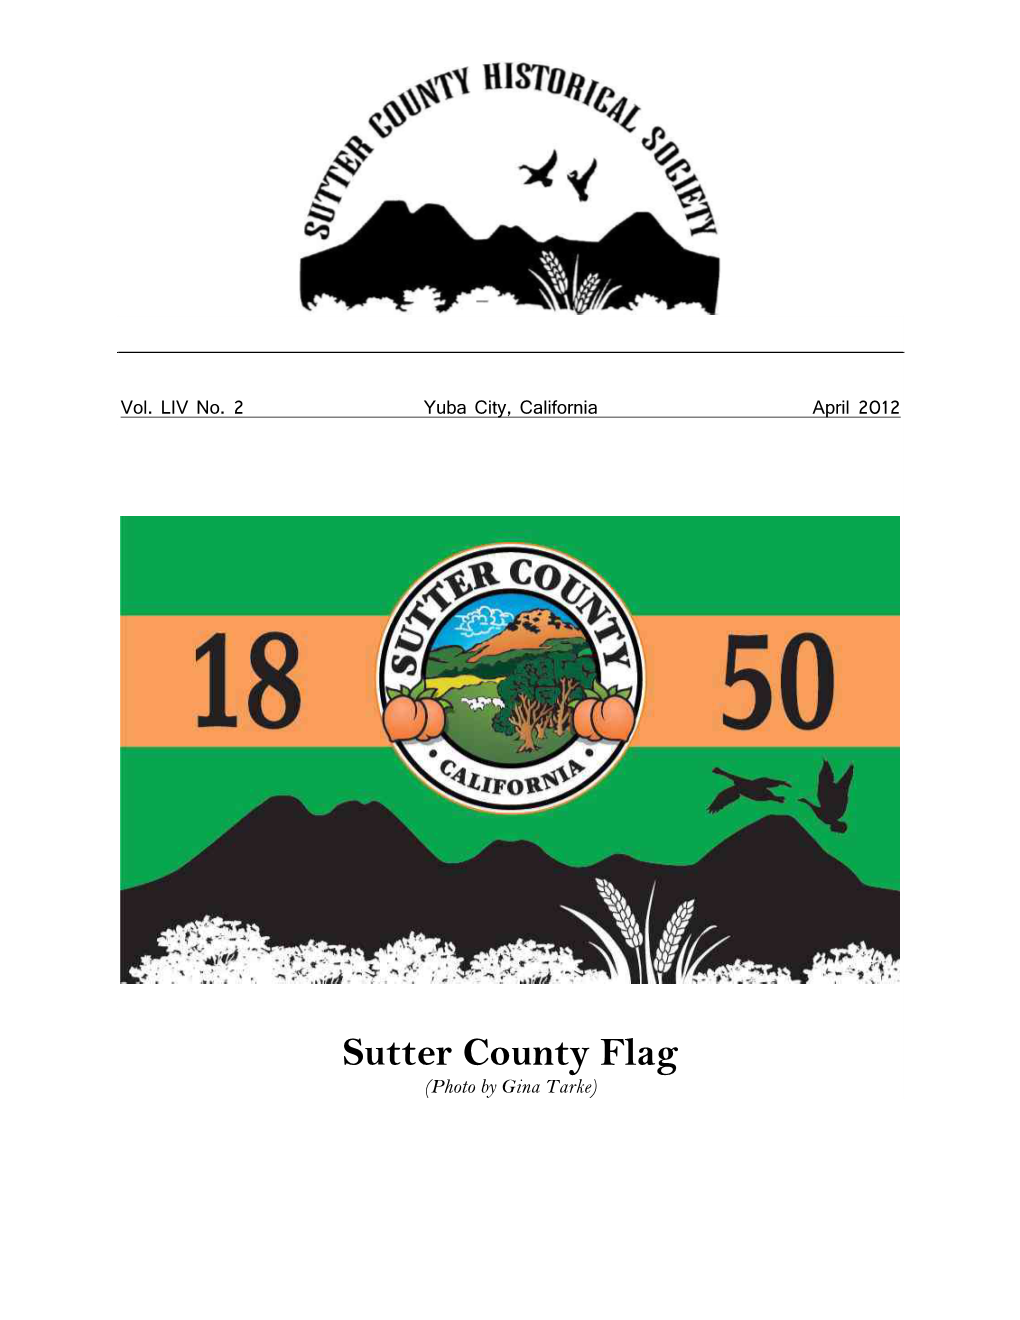 Sutter County Flag (Photo by Gina Tarke)